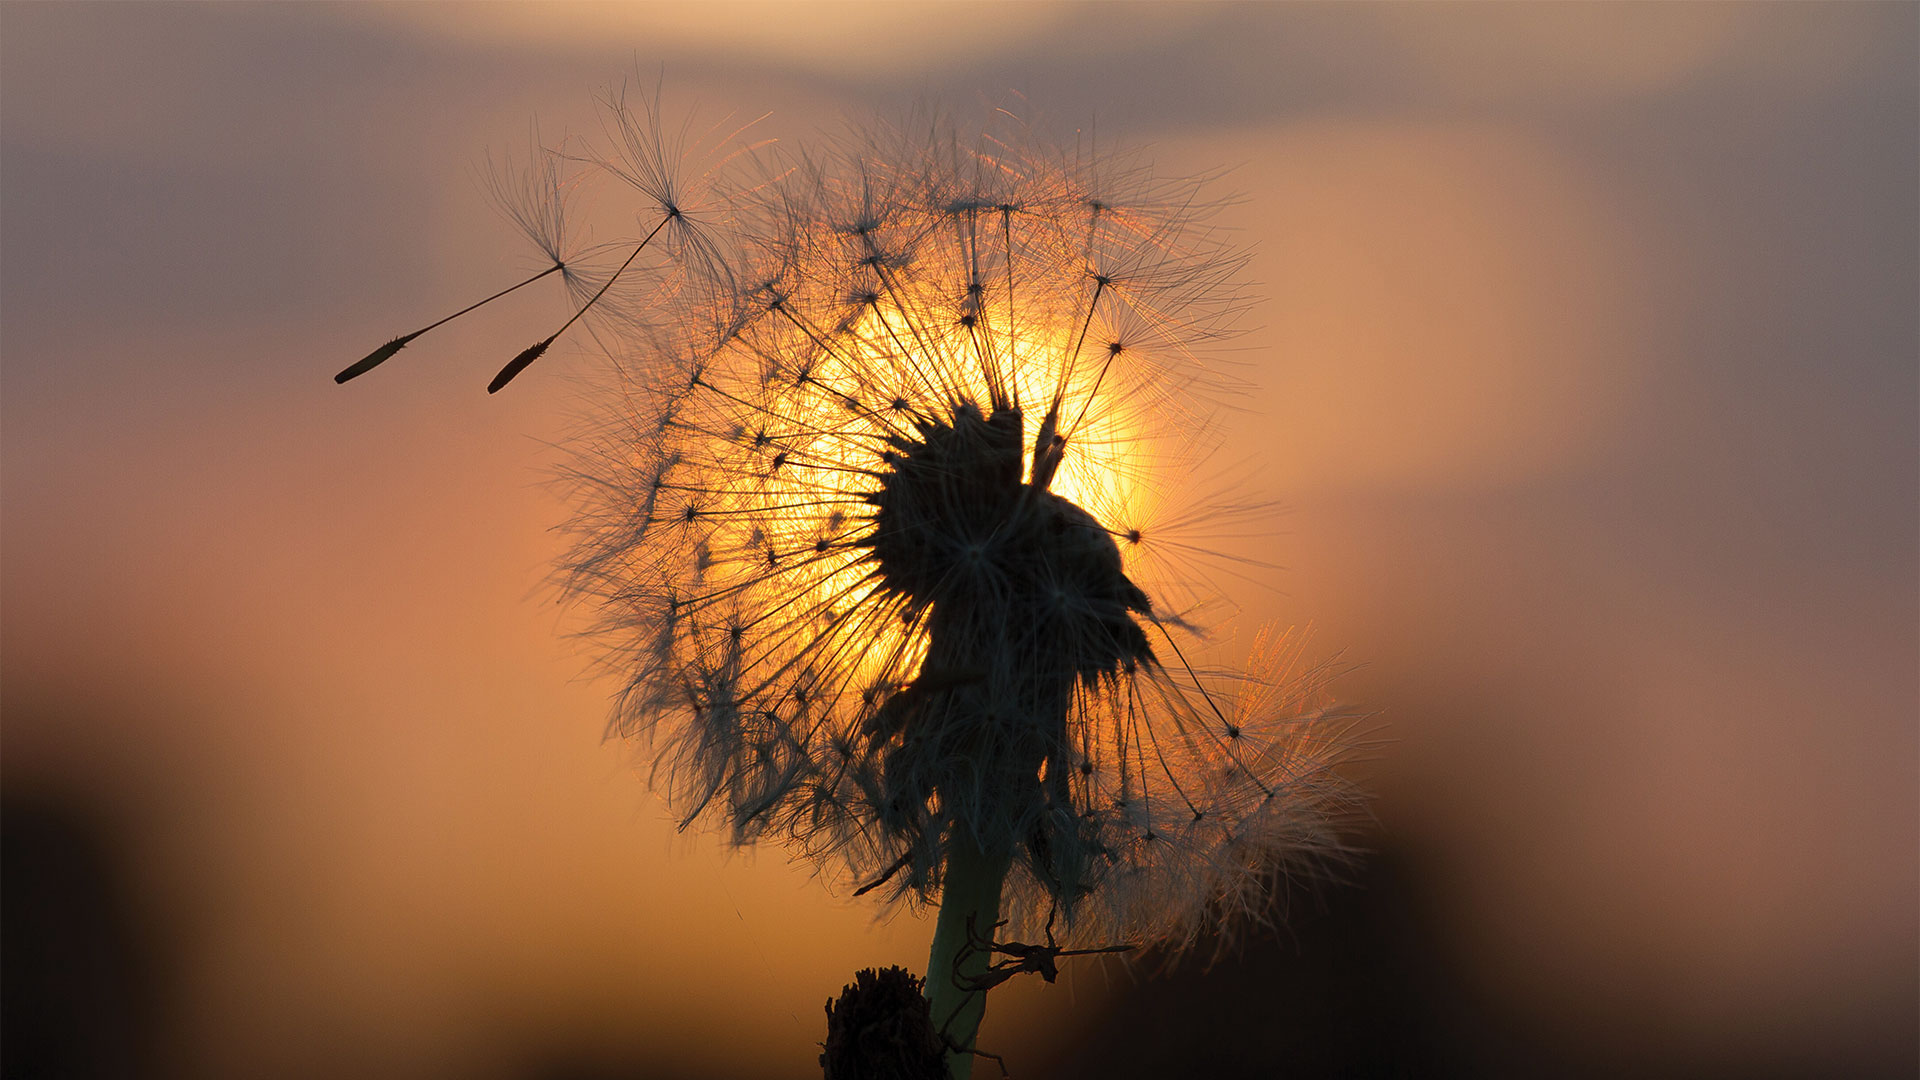 Dandelion being blown in the wind during sunset